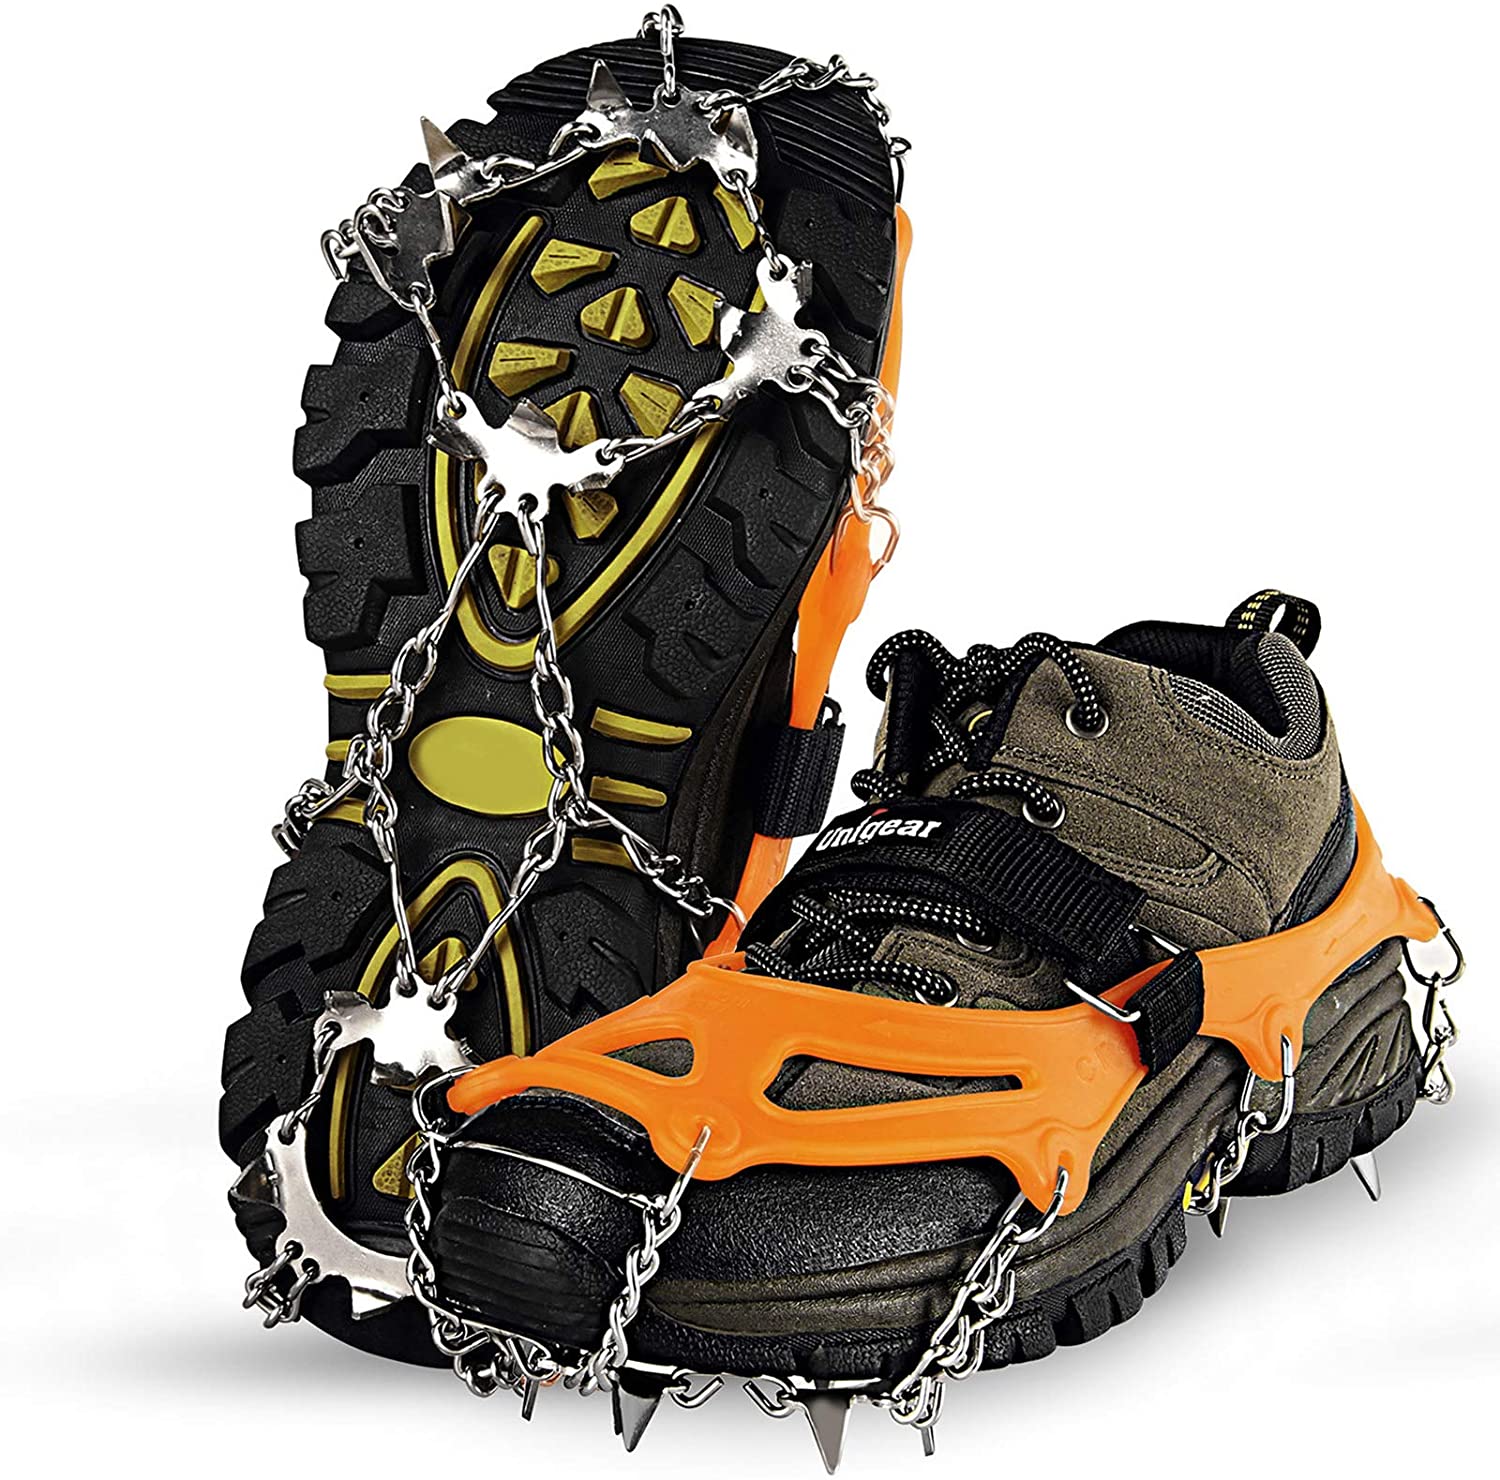 Flexible Slip-On Snow Grip Crampons with Steel Safety Spikes to Prevent Slipping for Walking and Hiking Outdoors Navaris Ice Traction Shoe Cleats 